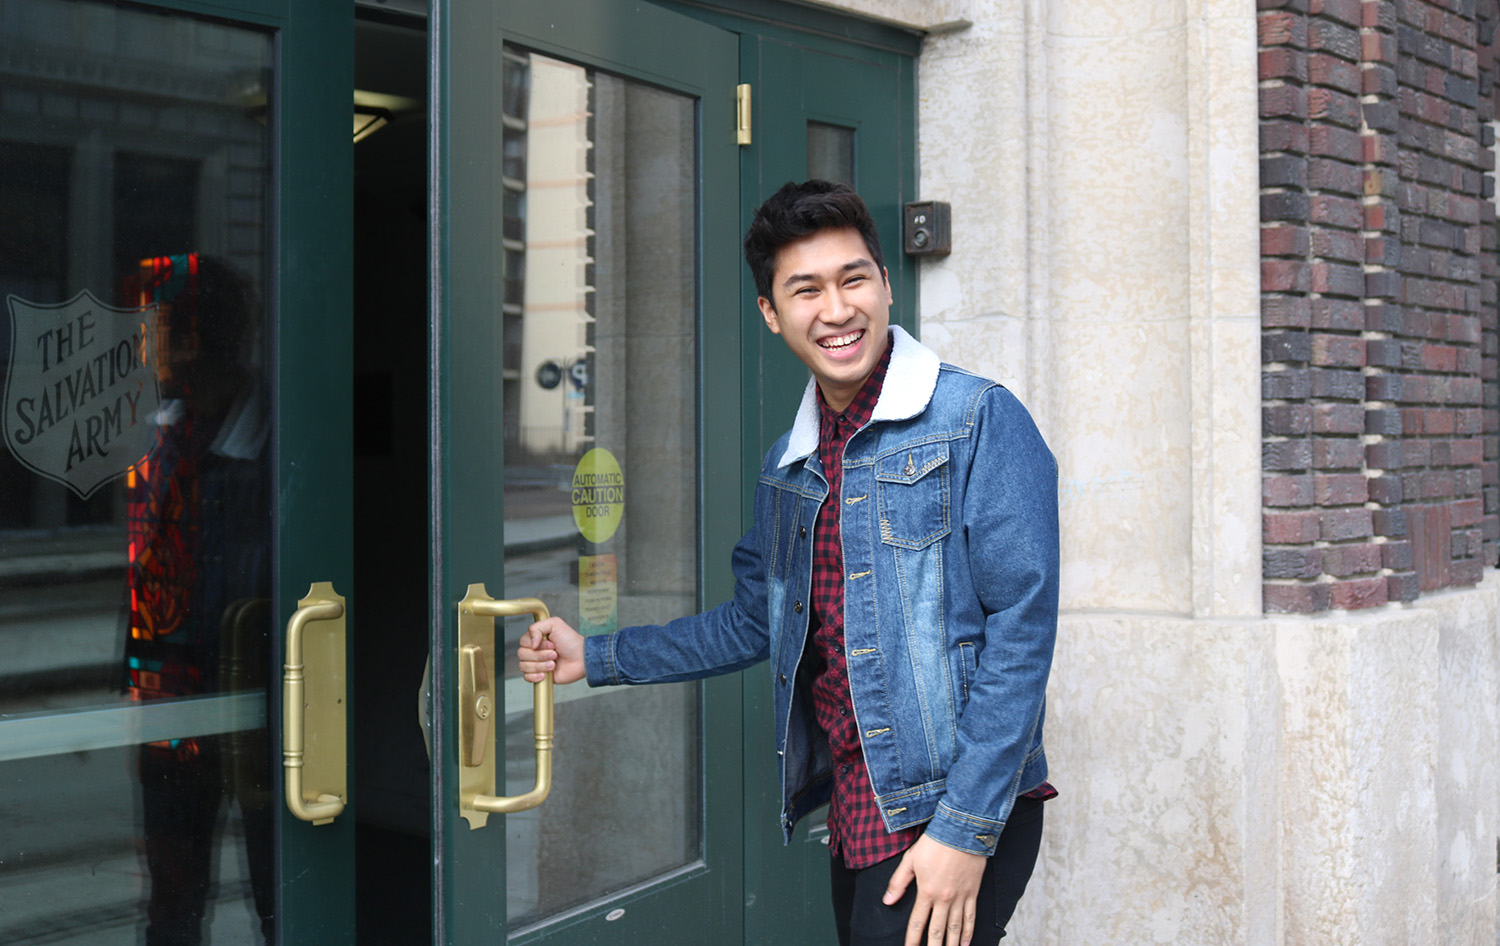 A male student opening the door at the front entrance.